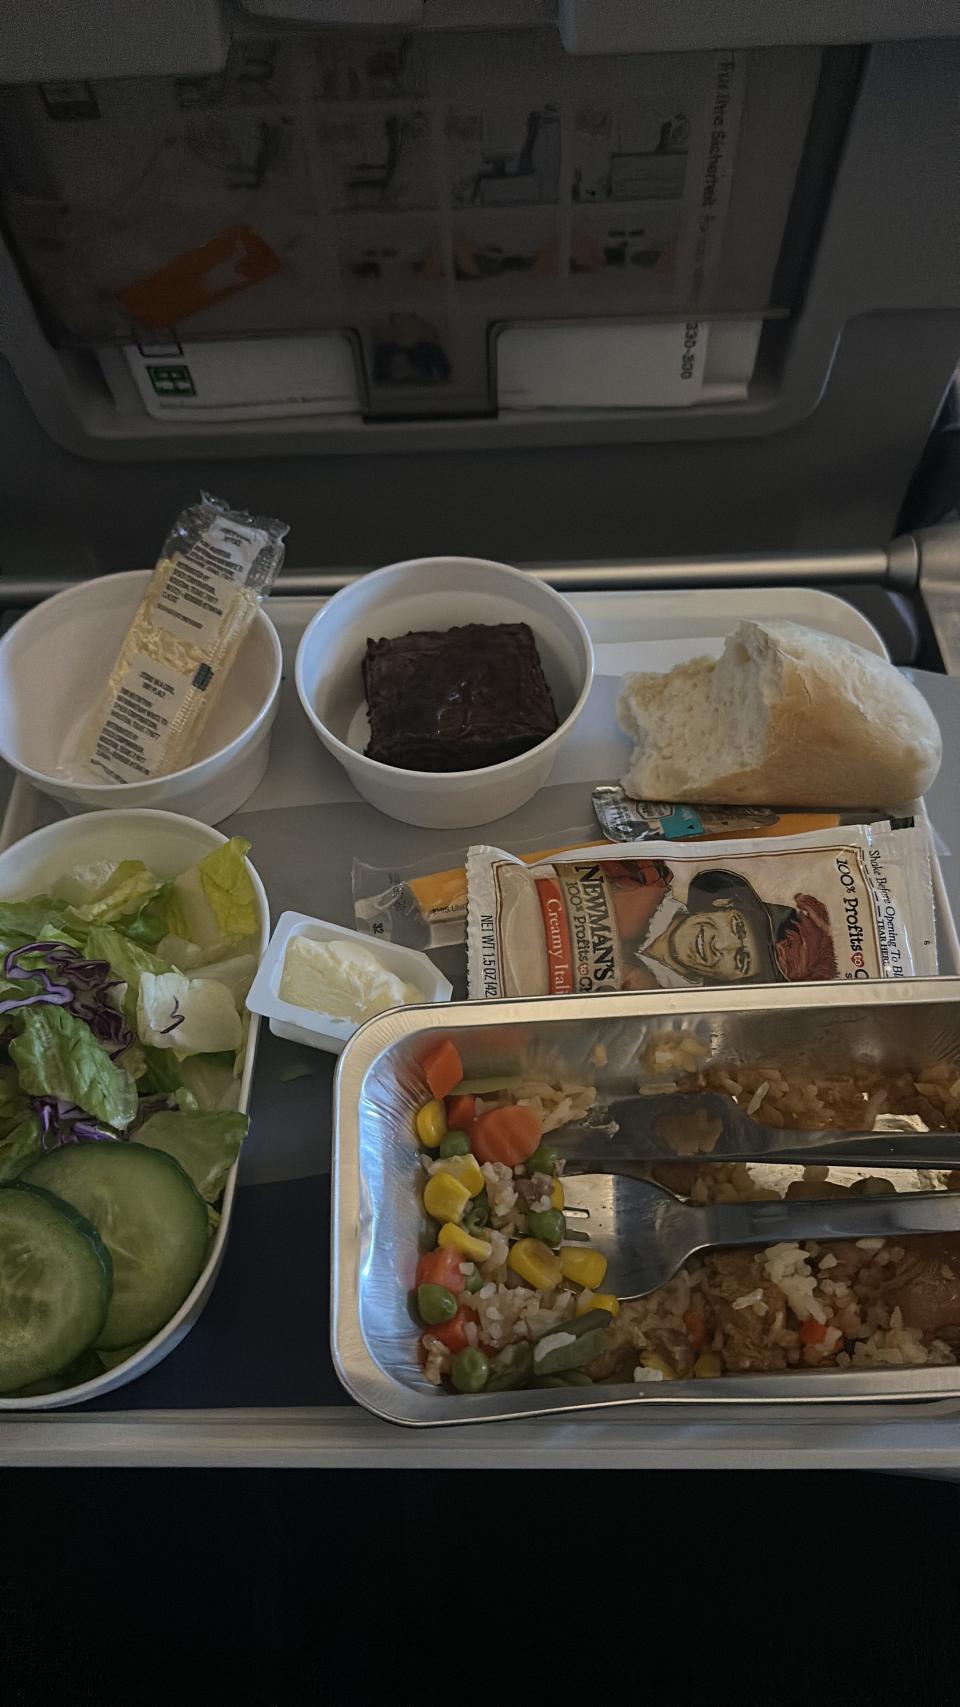 A picture of Raygada's in-flight meal.